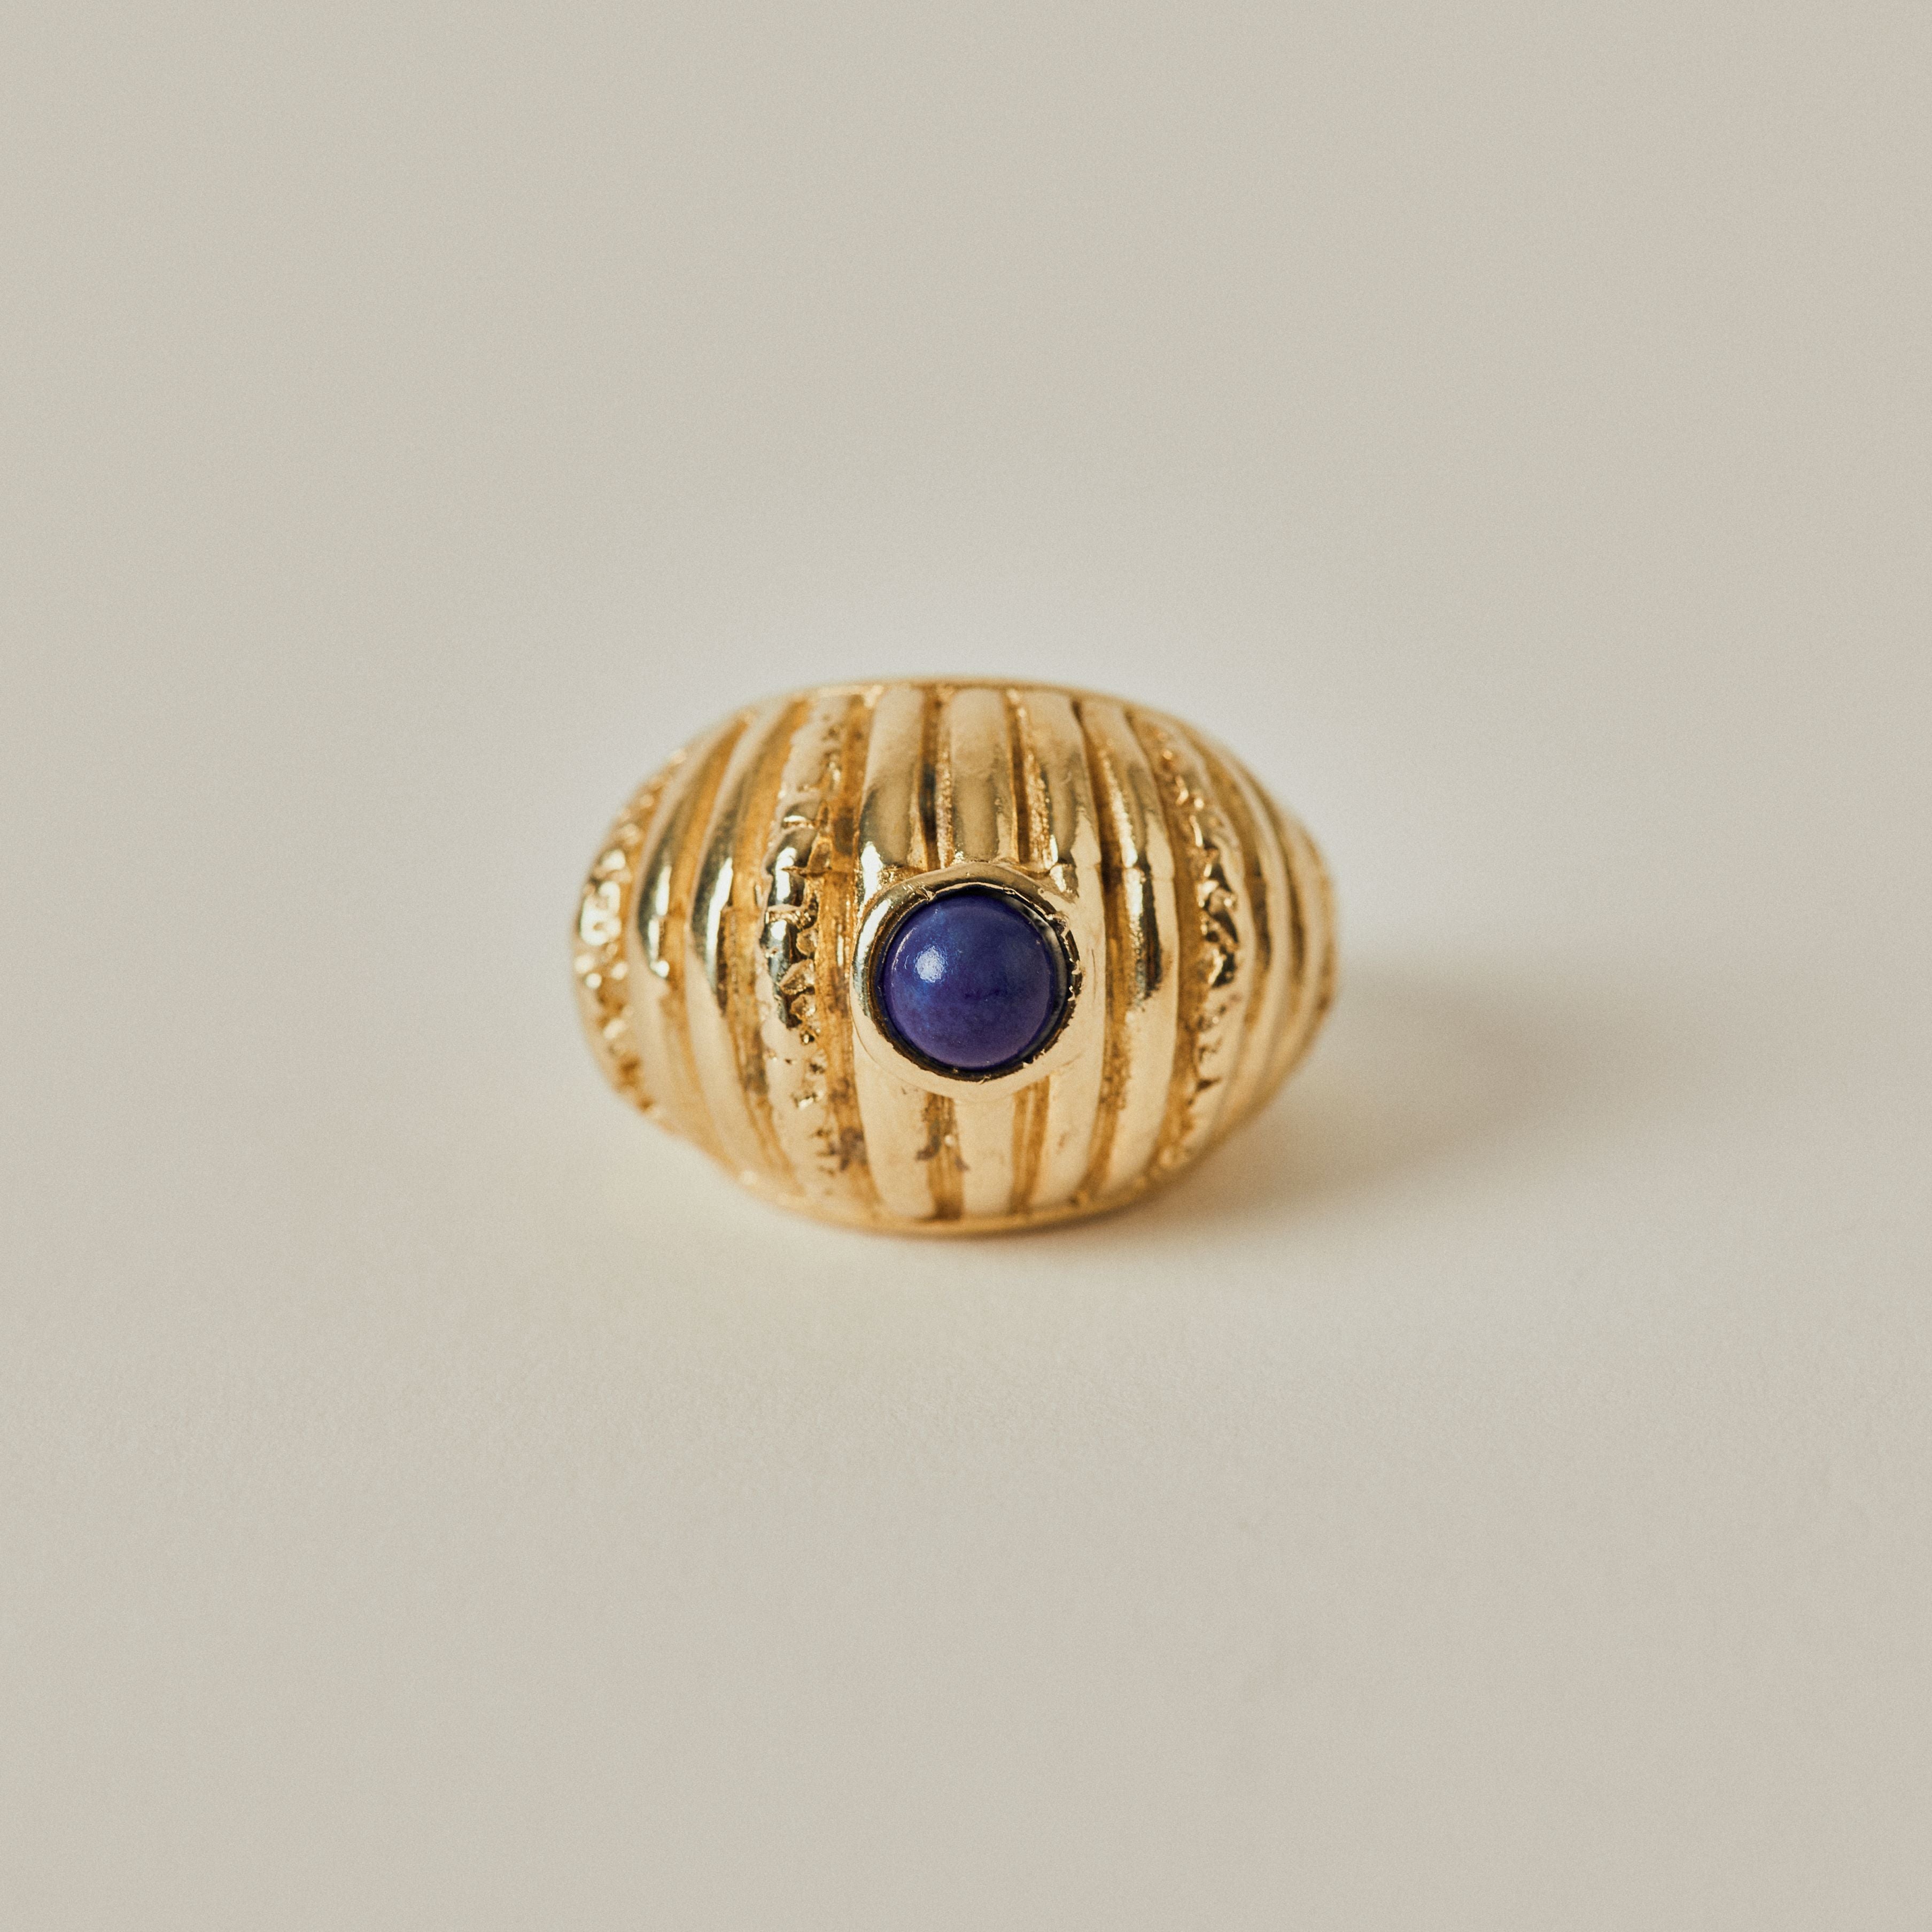 SMALL REEF RING